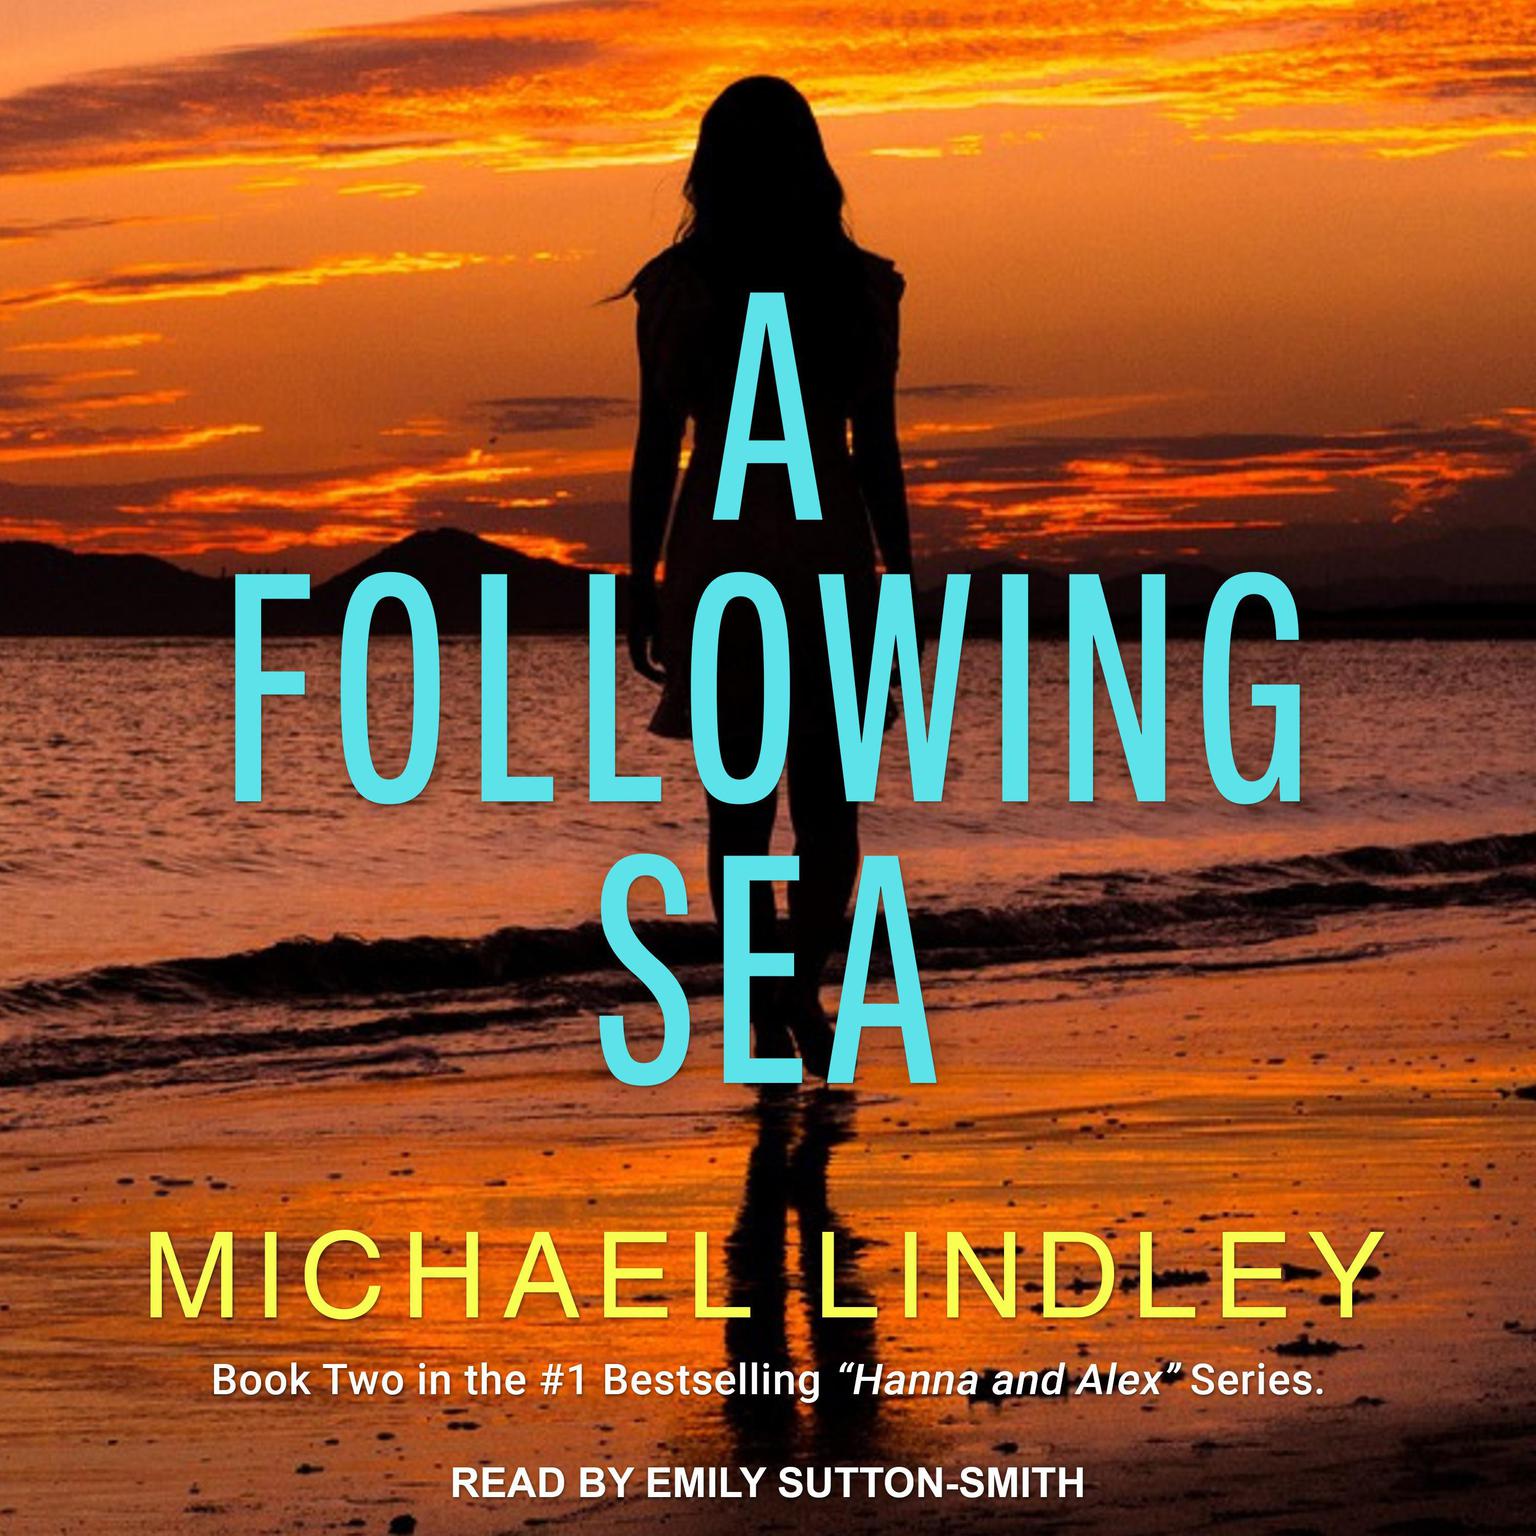 A Following Sea Audiobook, by Michael Lindley